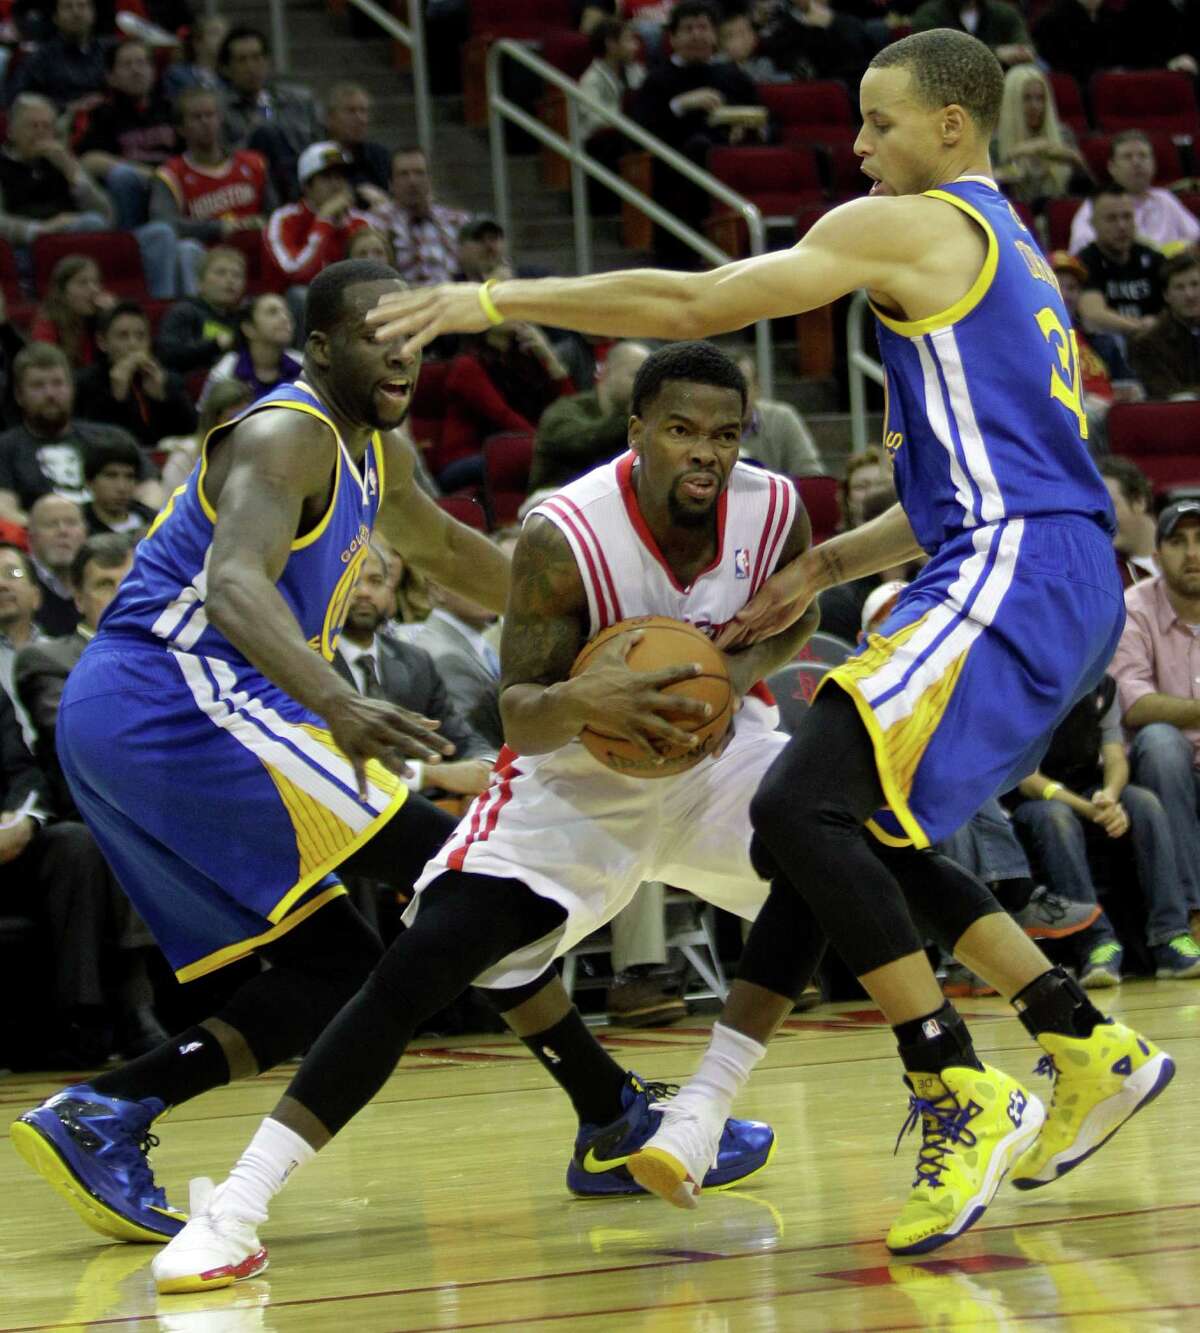 Aaron Brooks, center, did his best to elude the pressure applied by Draymond Green, left, and Stephen Curry in the Rockets' rout of the Warriors on Friday.